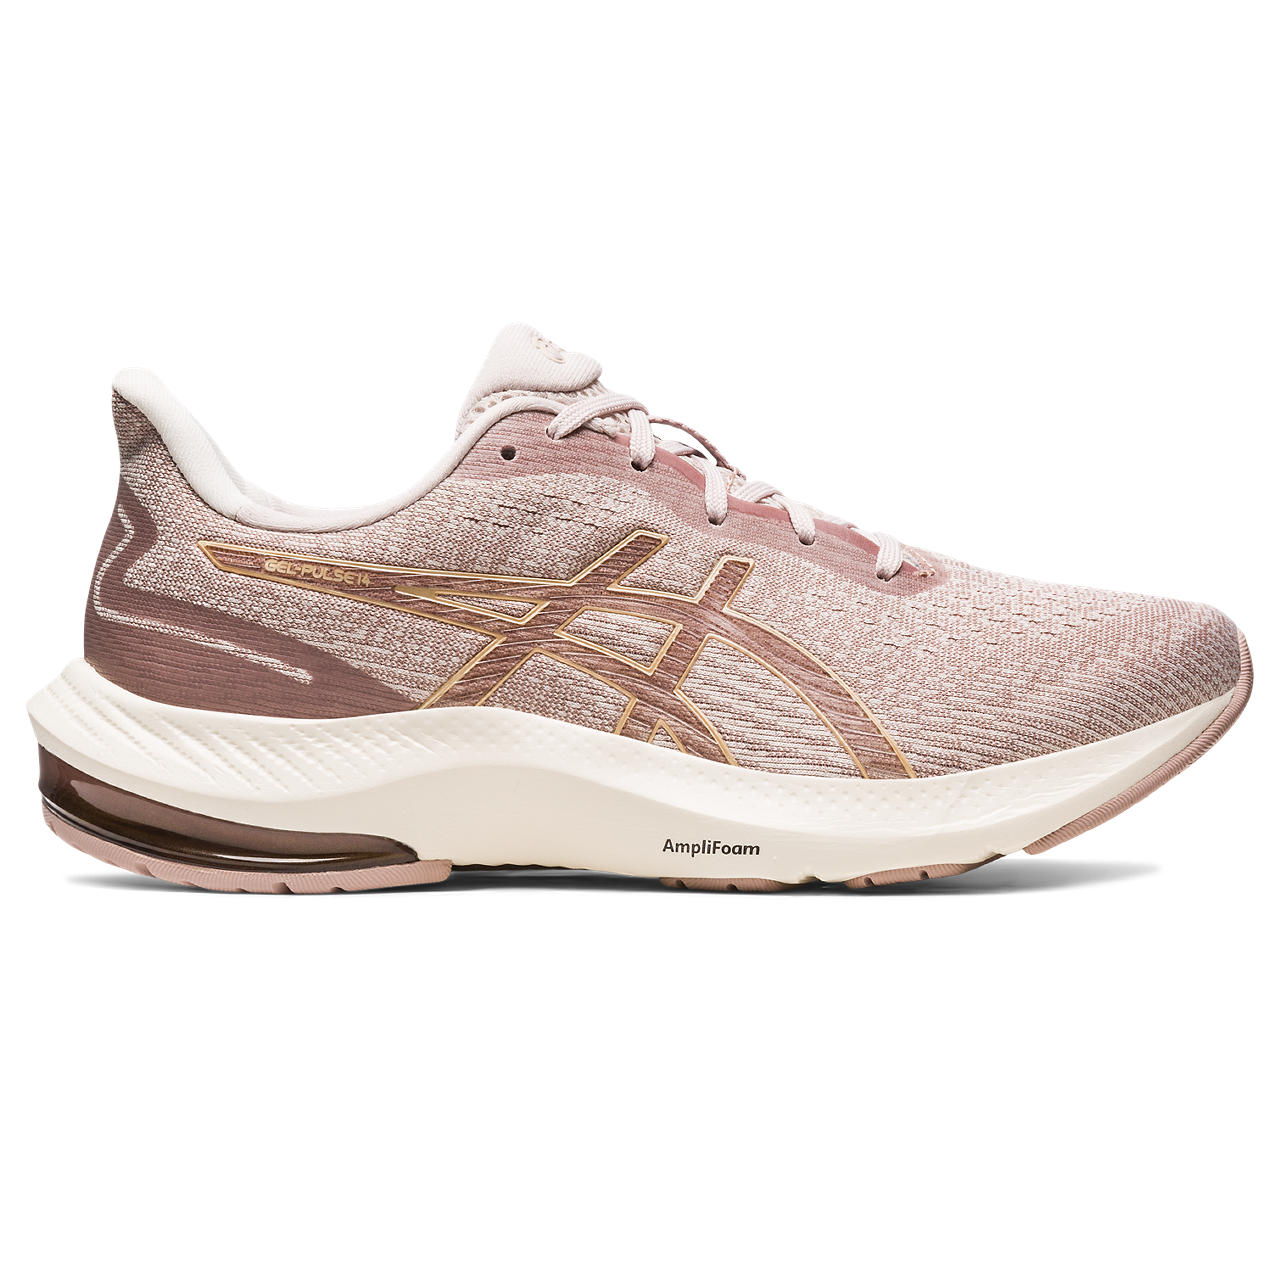 ASICS GEL-PULSE 14, MINERAL BEIGE/CHAMPAGNE, swatch